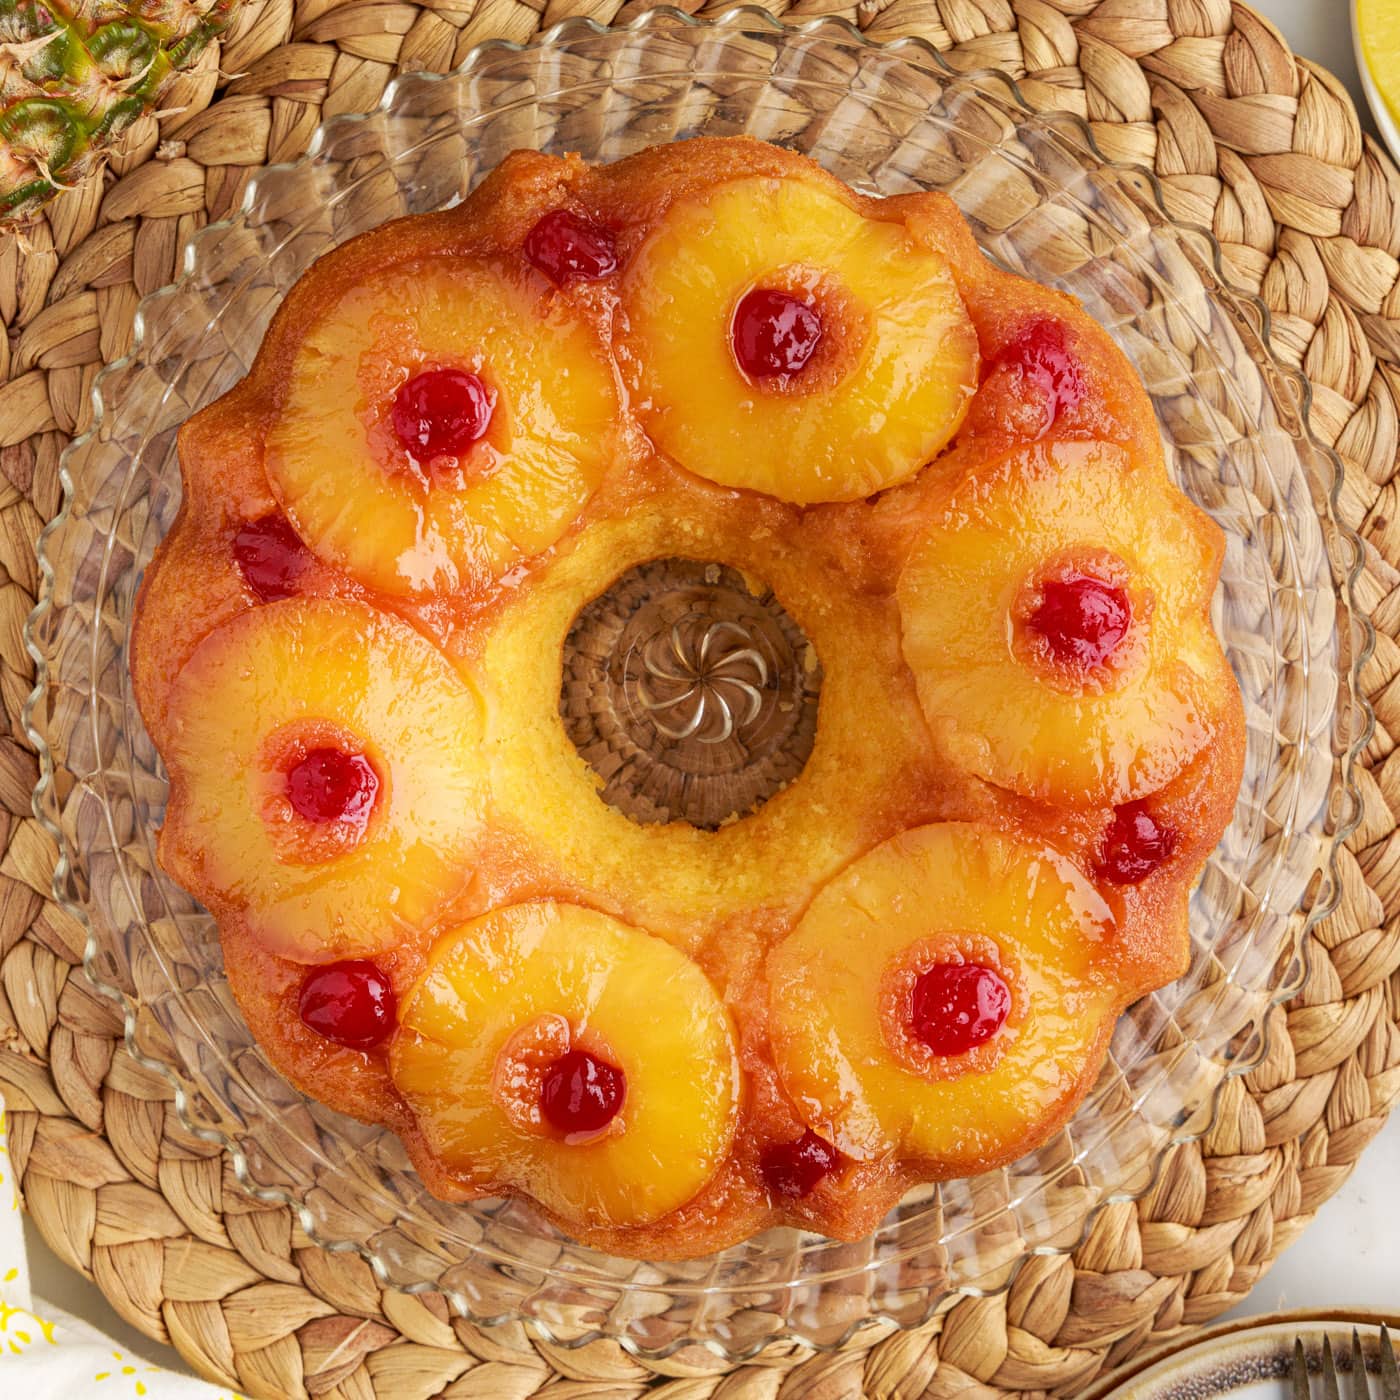 Old Fashioned Pineapple Upside Down Cake from Scratch - Restless Chipotle